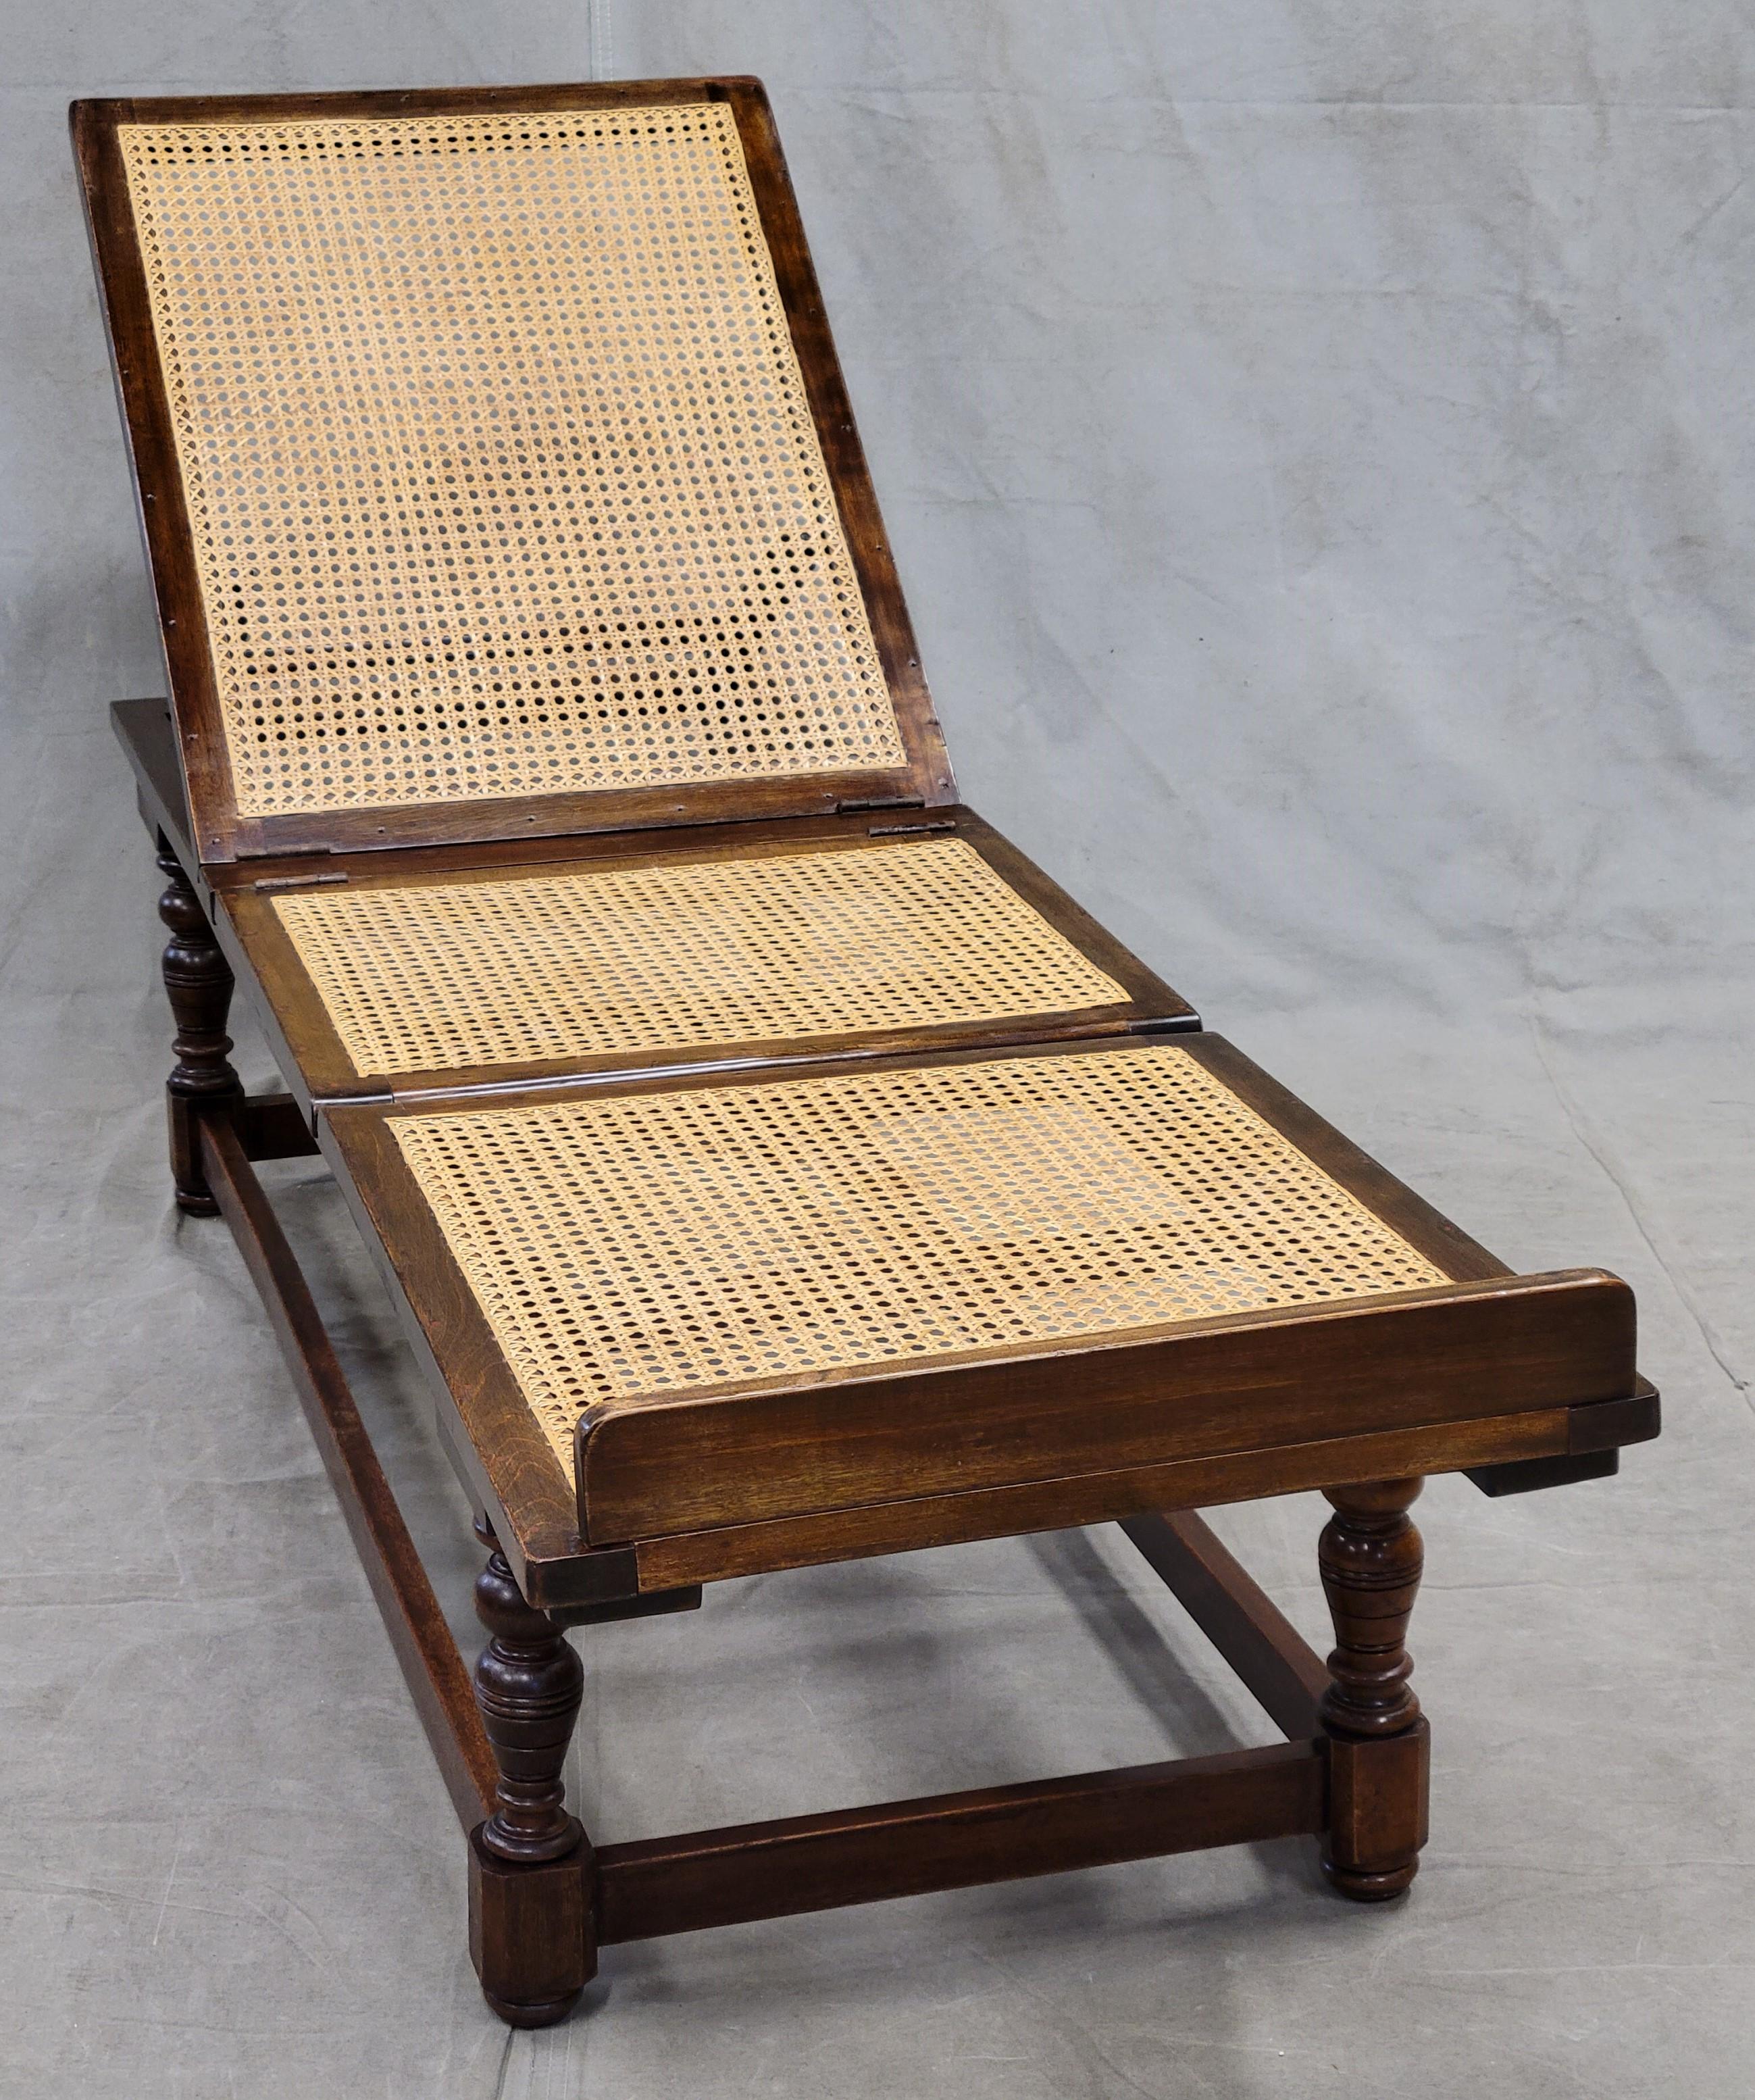 An elegant antique 1910s Leveson & Sons, London, English Colonial mahogany caned folding campaign daybed / deck chair. Hinged and notched for adjustments at the head, knees and feet. Foot rail at bottom end portion. Solid base makes this gorgeous